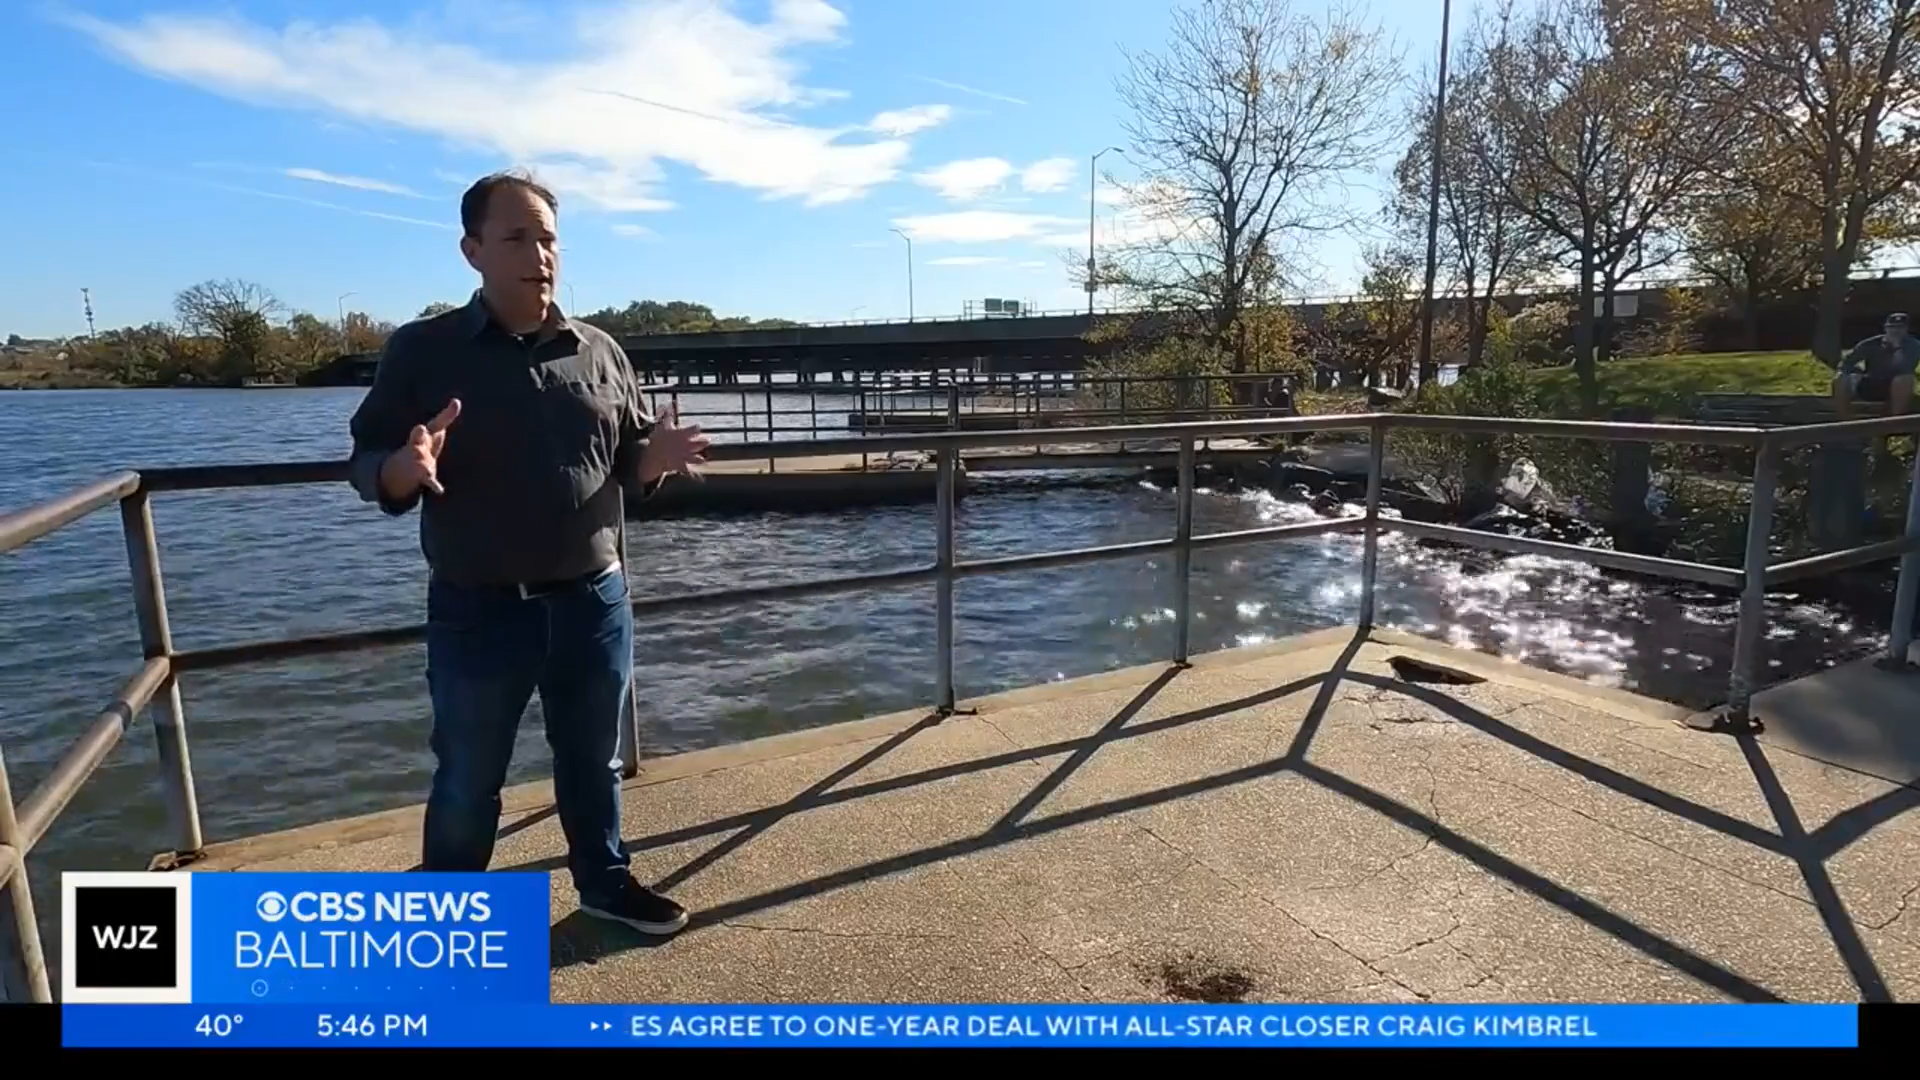 Screenshot from the interview of Brad Rogers, a white man wearing a gray shirt and jeans, standing on a pier in the Middle Branch with the waterfront and bridge in the background.